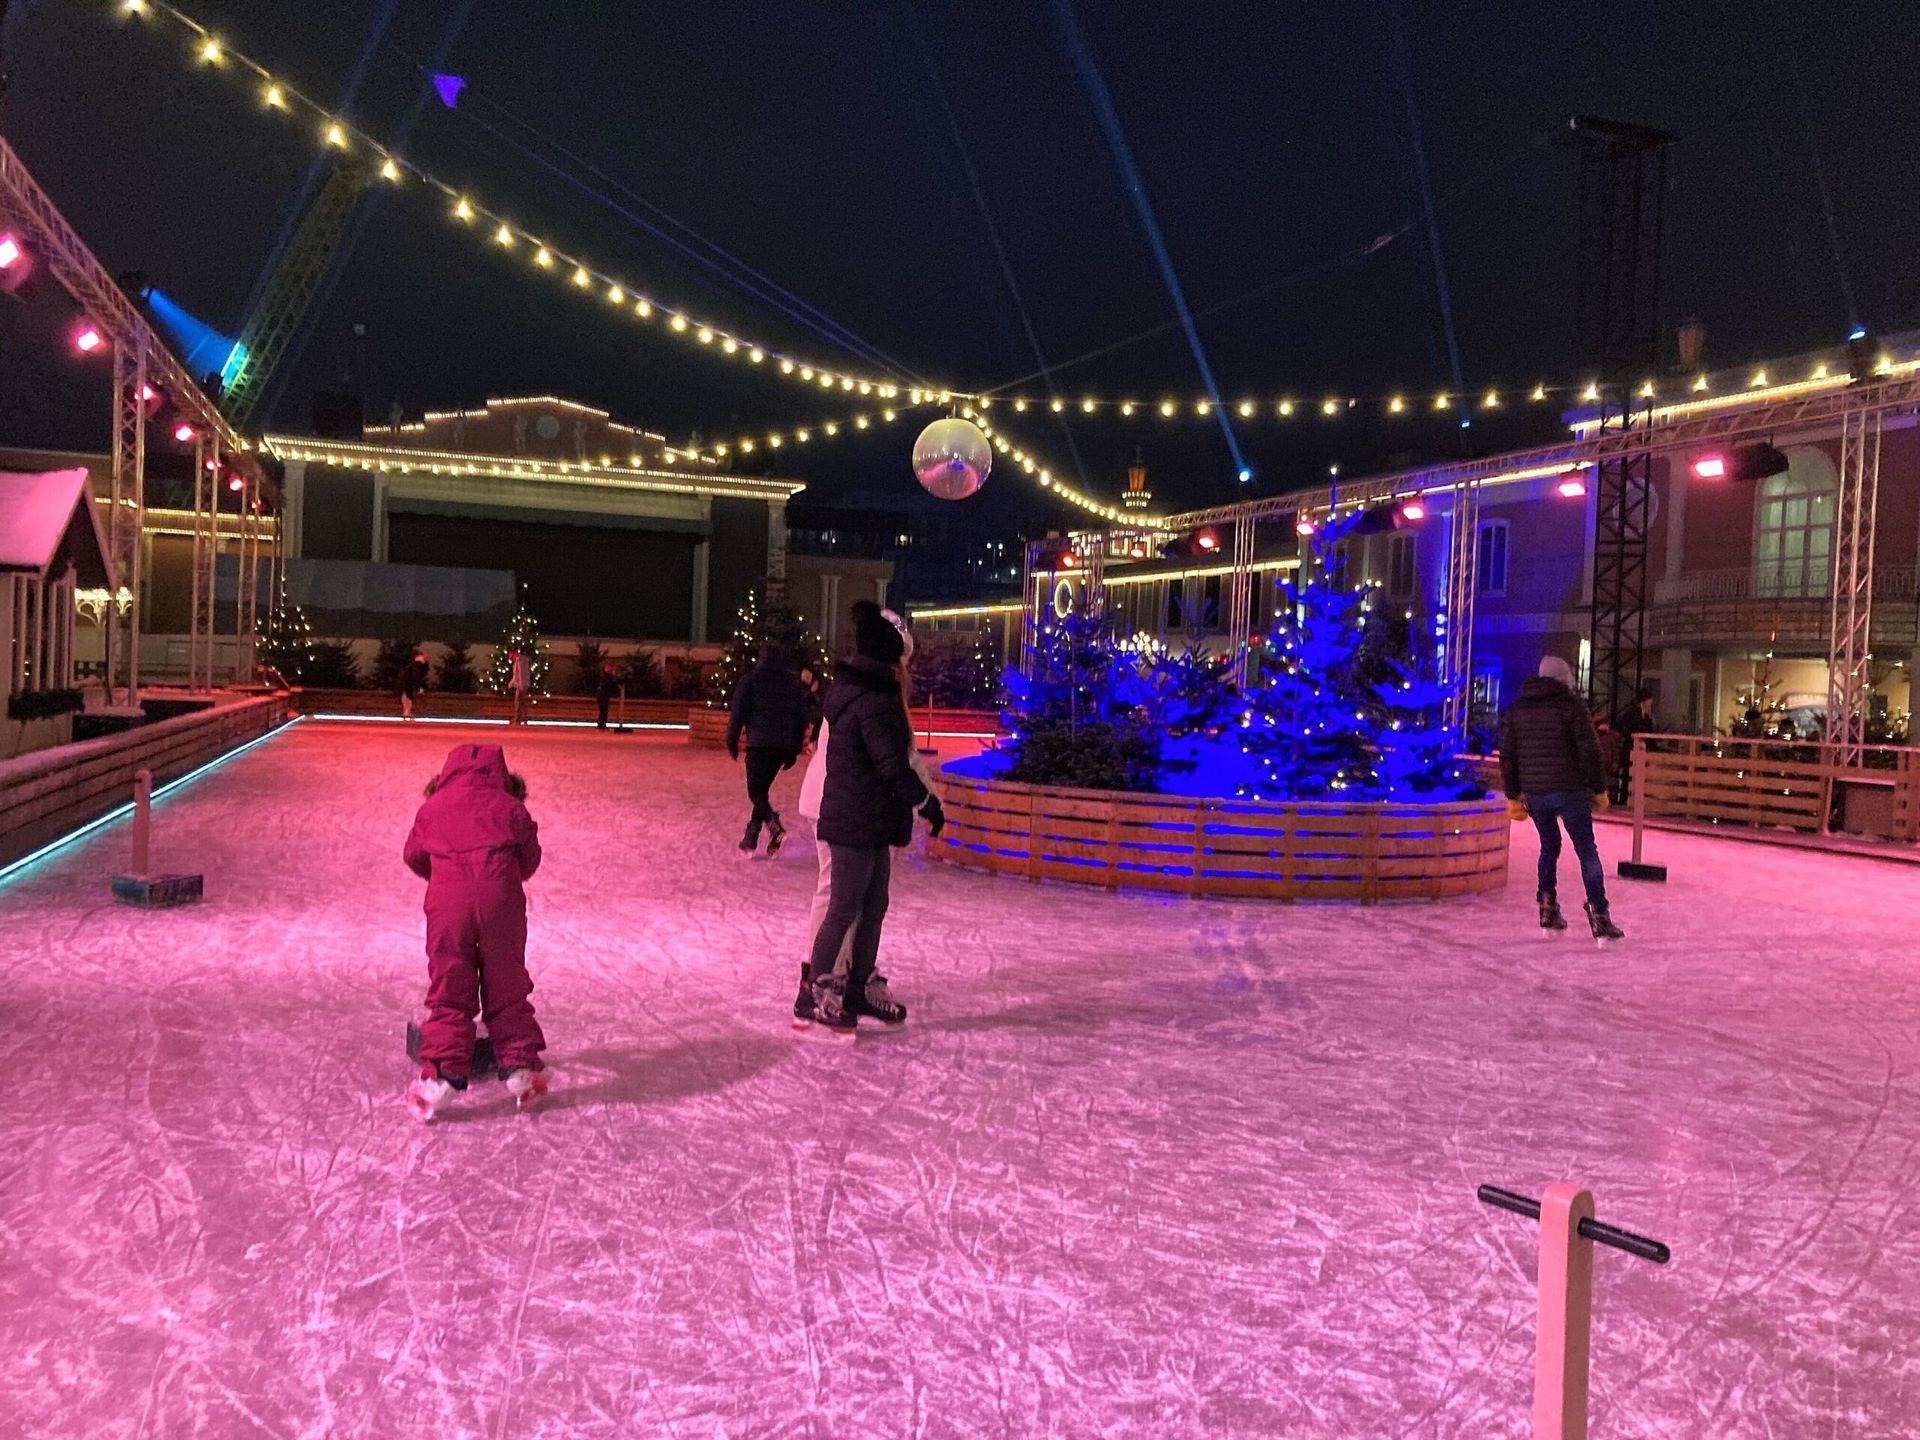 A festive ice-skating rink illuminated by a gentle pink glow.